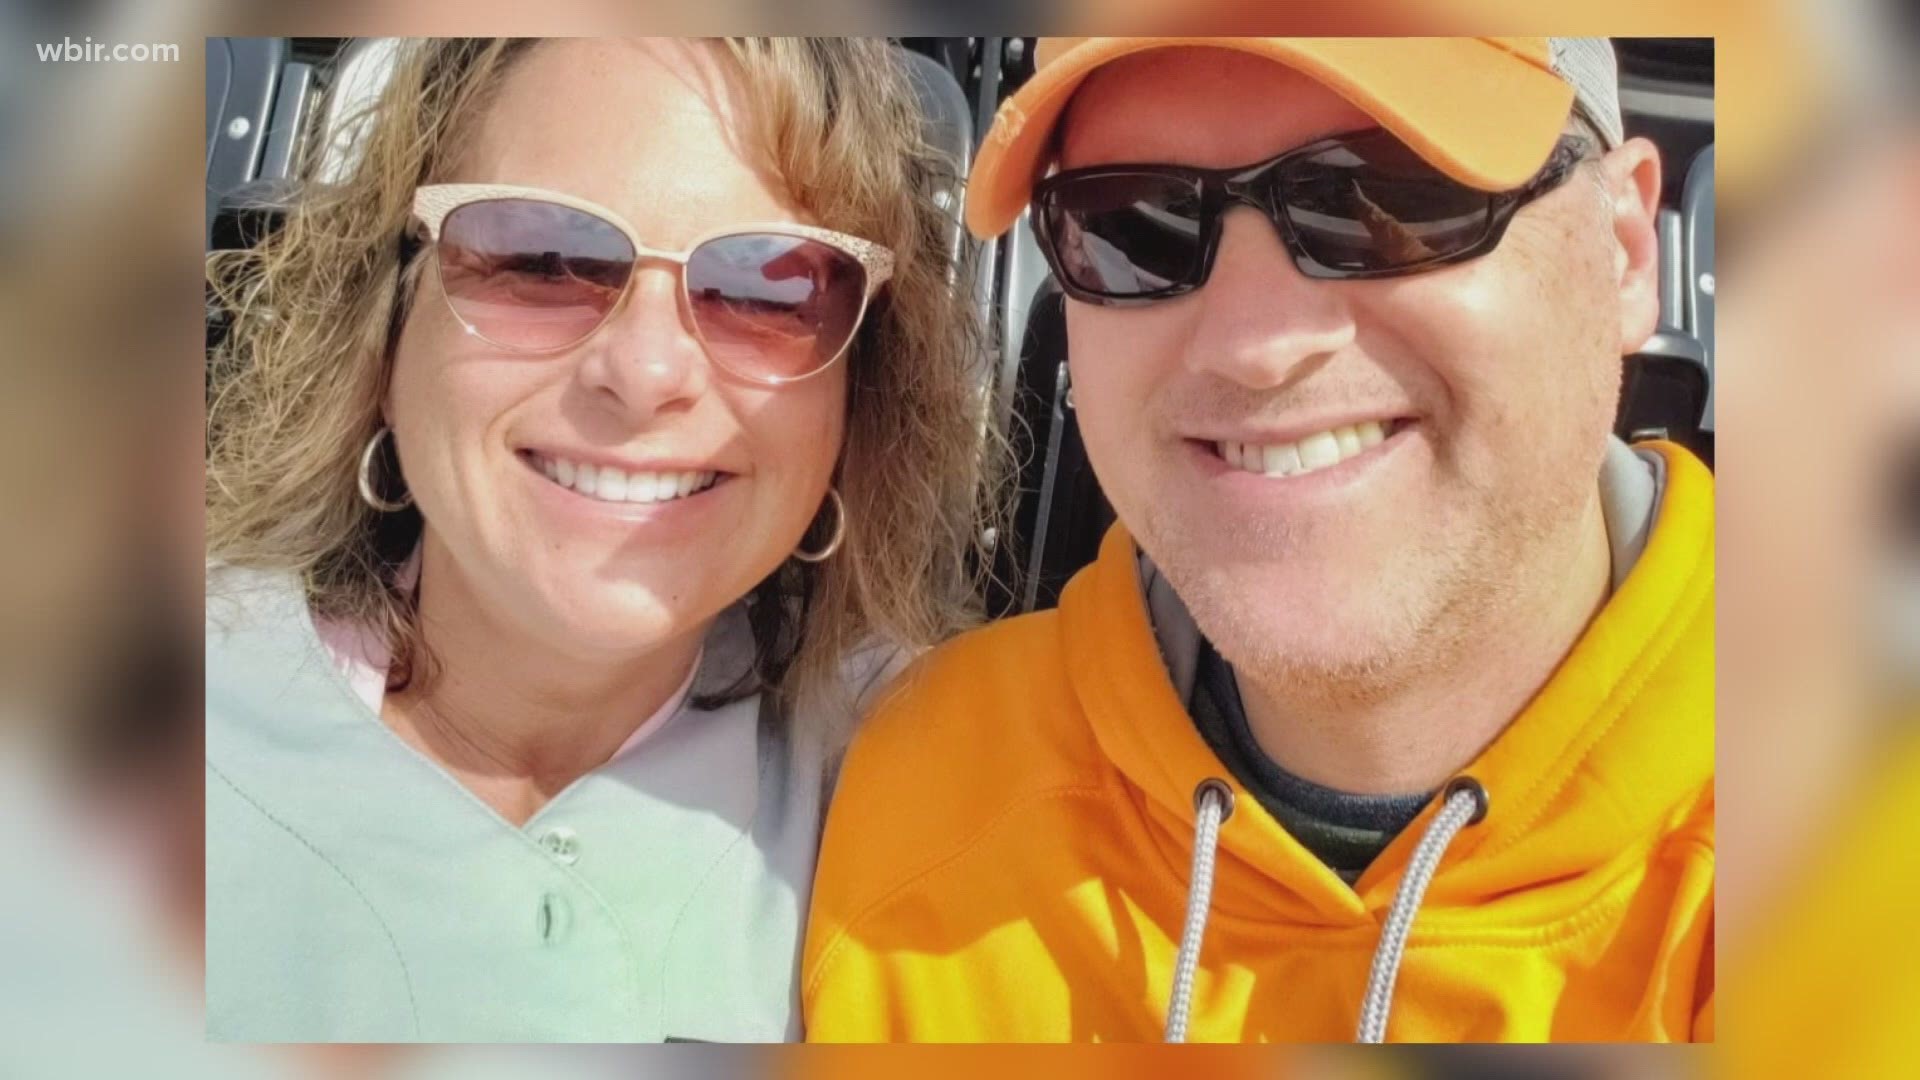 A former UT baseball player always knew he wanted to help others. So, after college, he became a nurse and felt called to help during the COVID-19 pandemic.